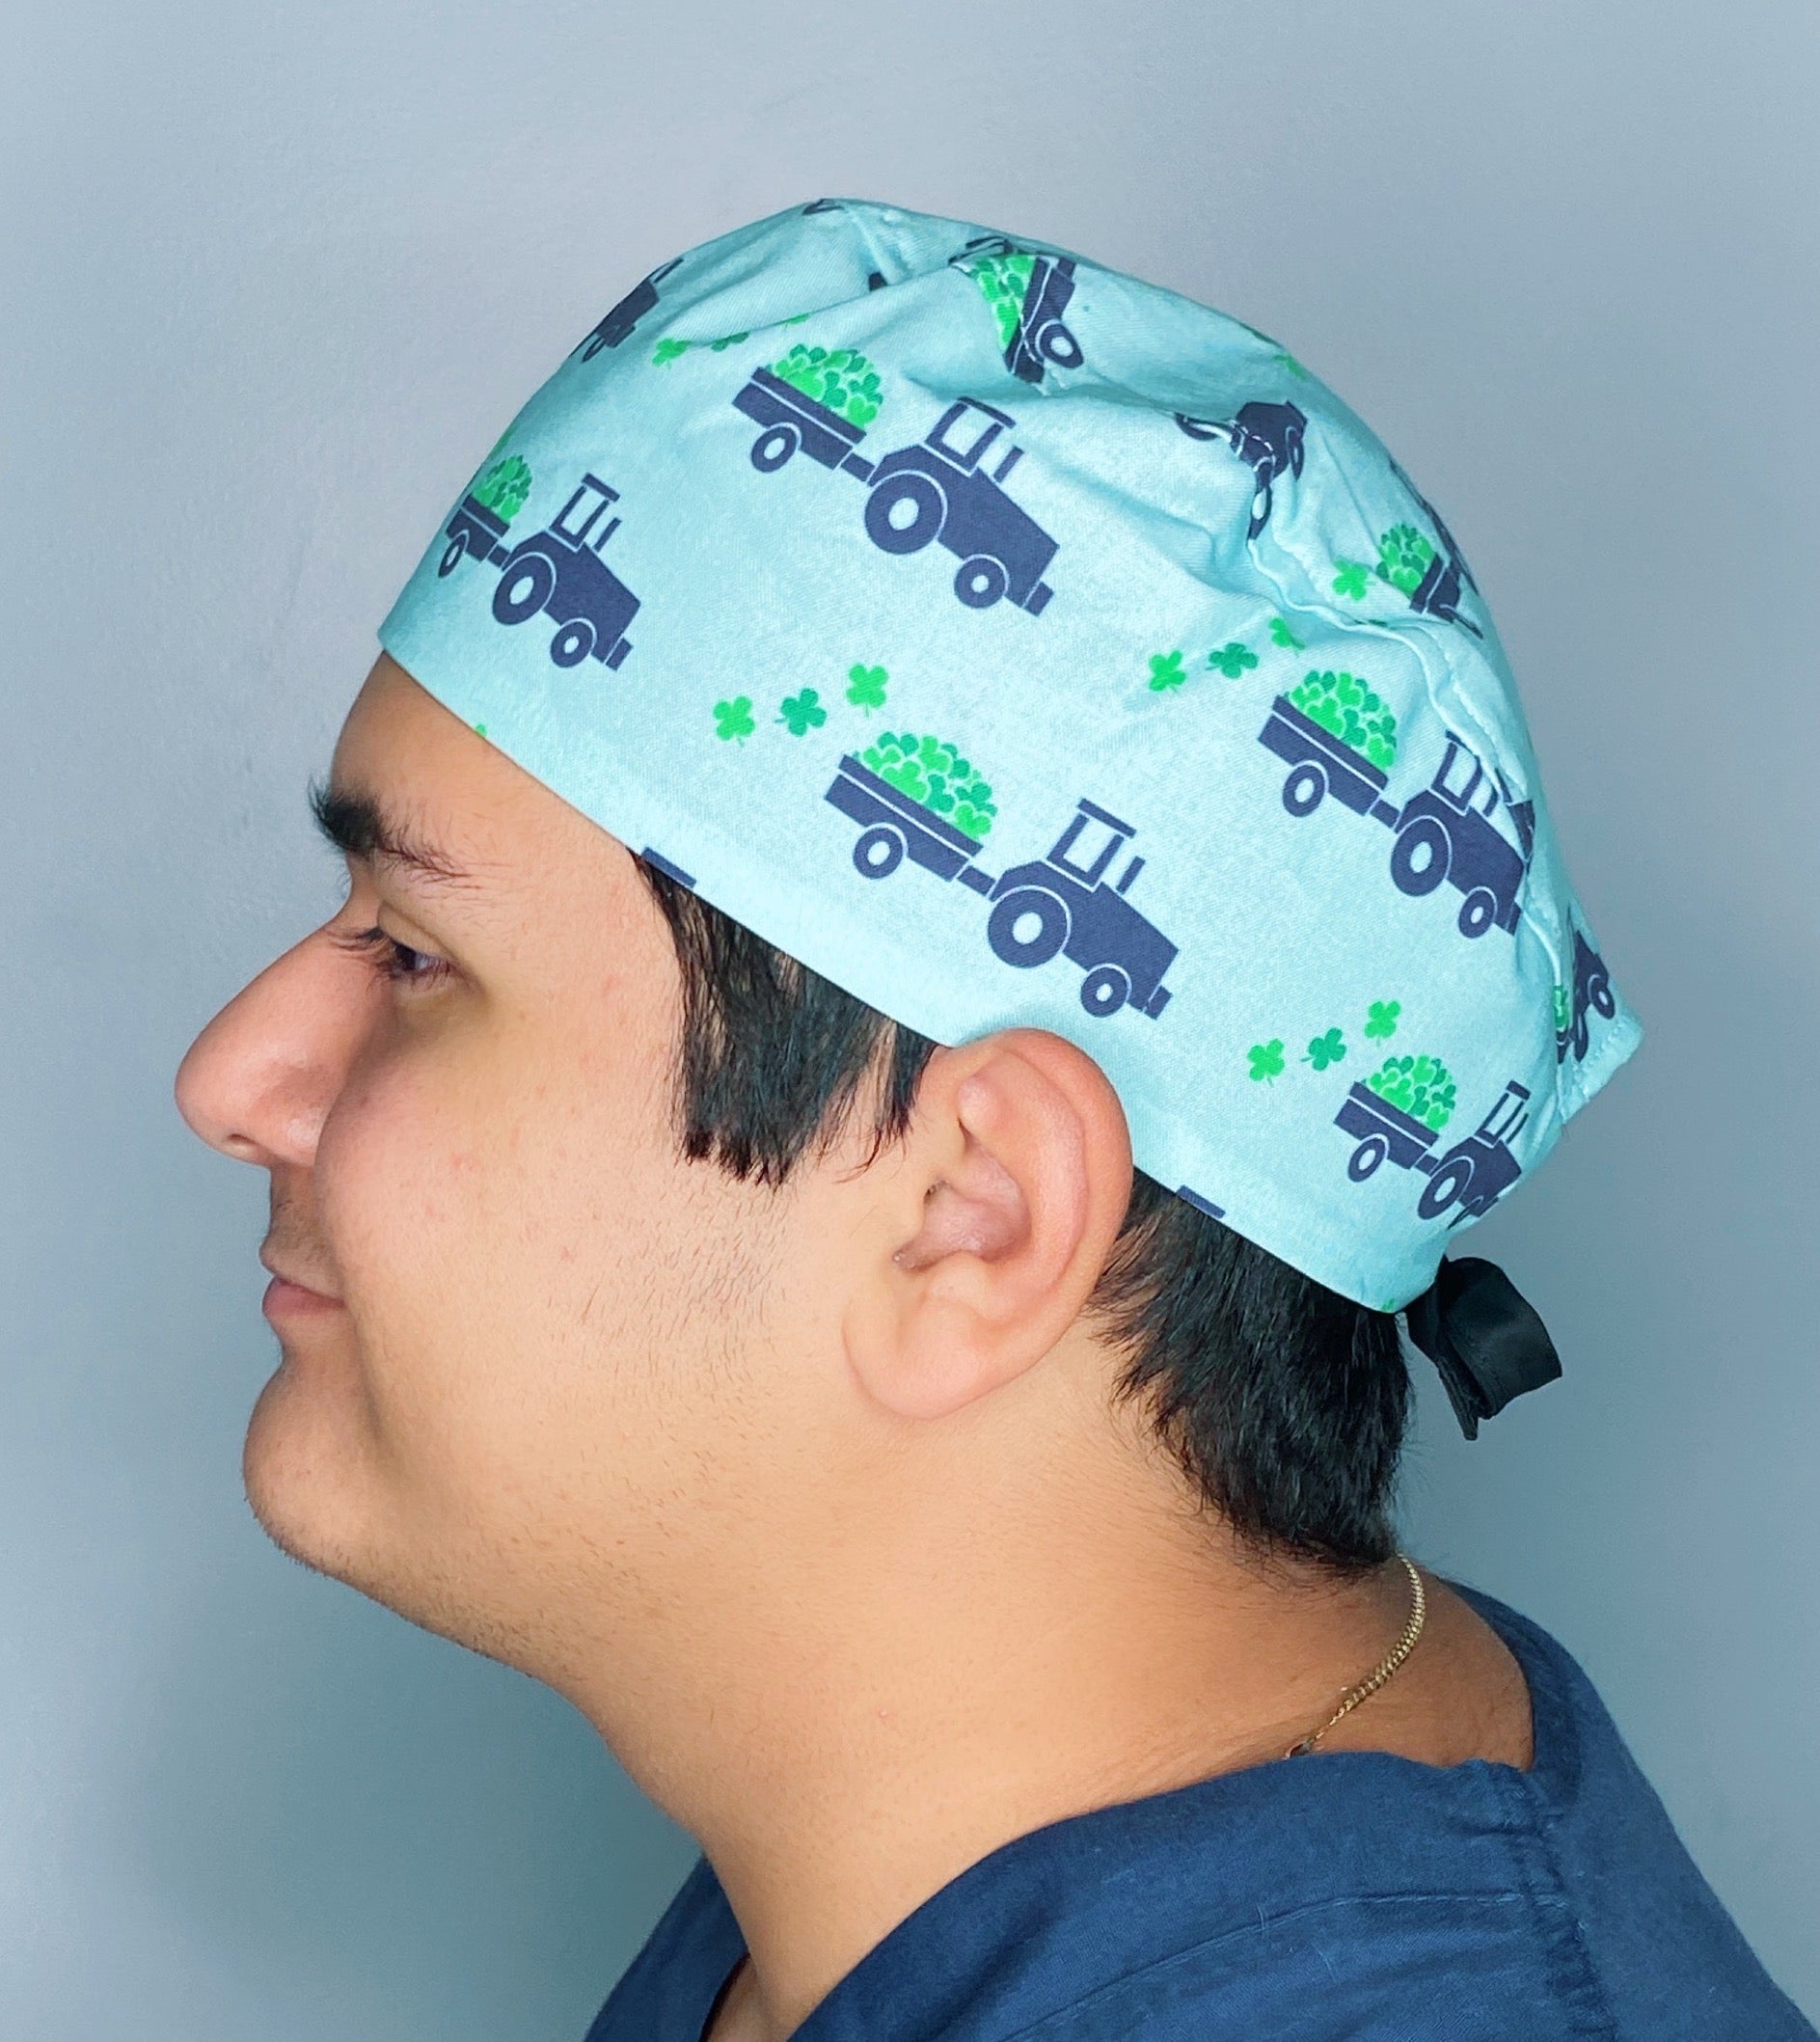 Clover Leaves & Tractors St. Patrick's Day Unisex Holiday Scrub Cap